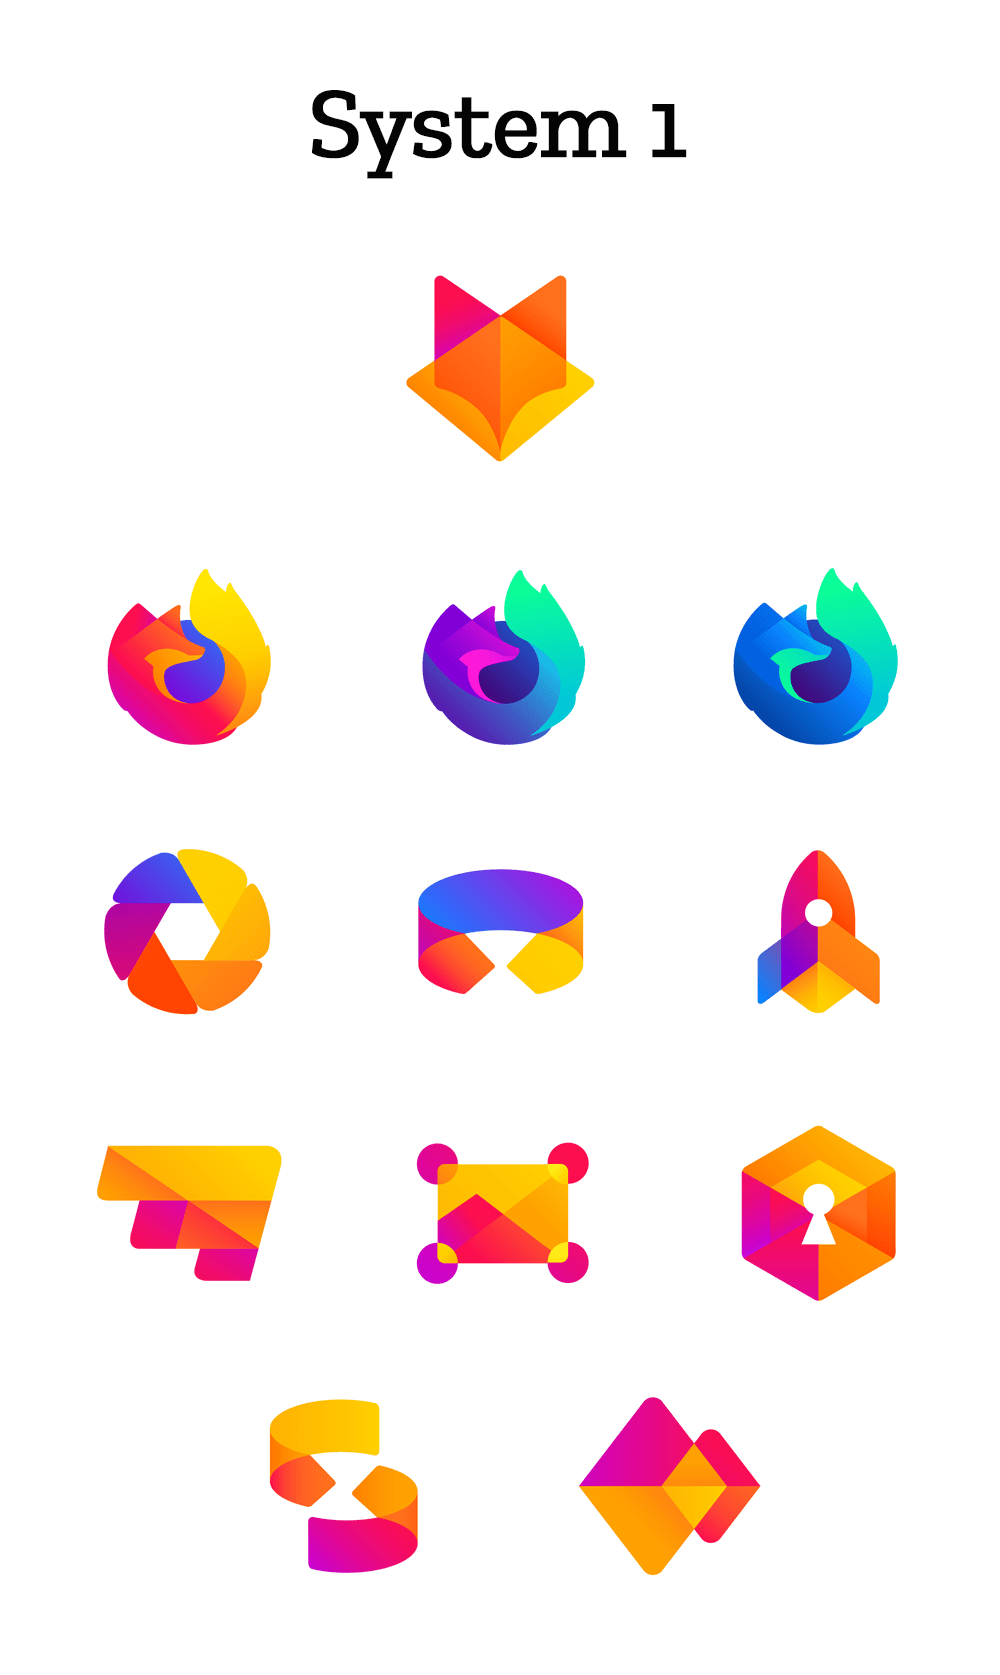 Firefox changes its icon